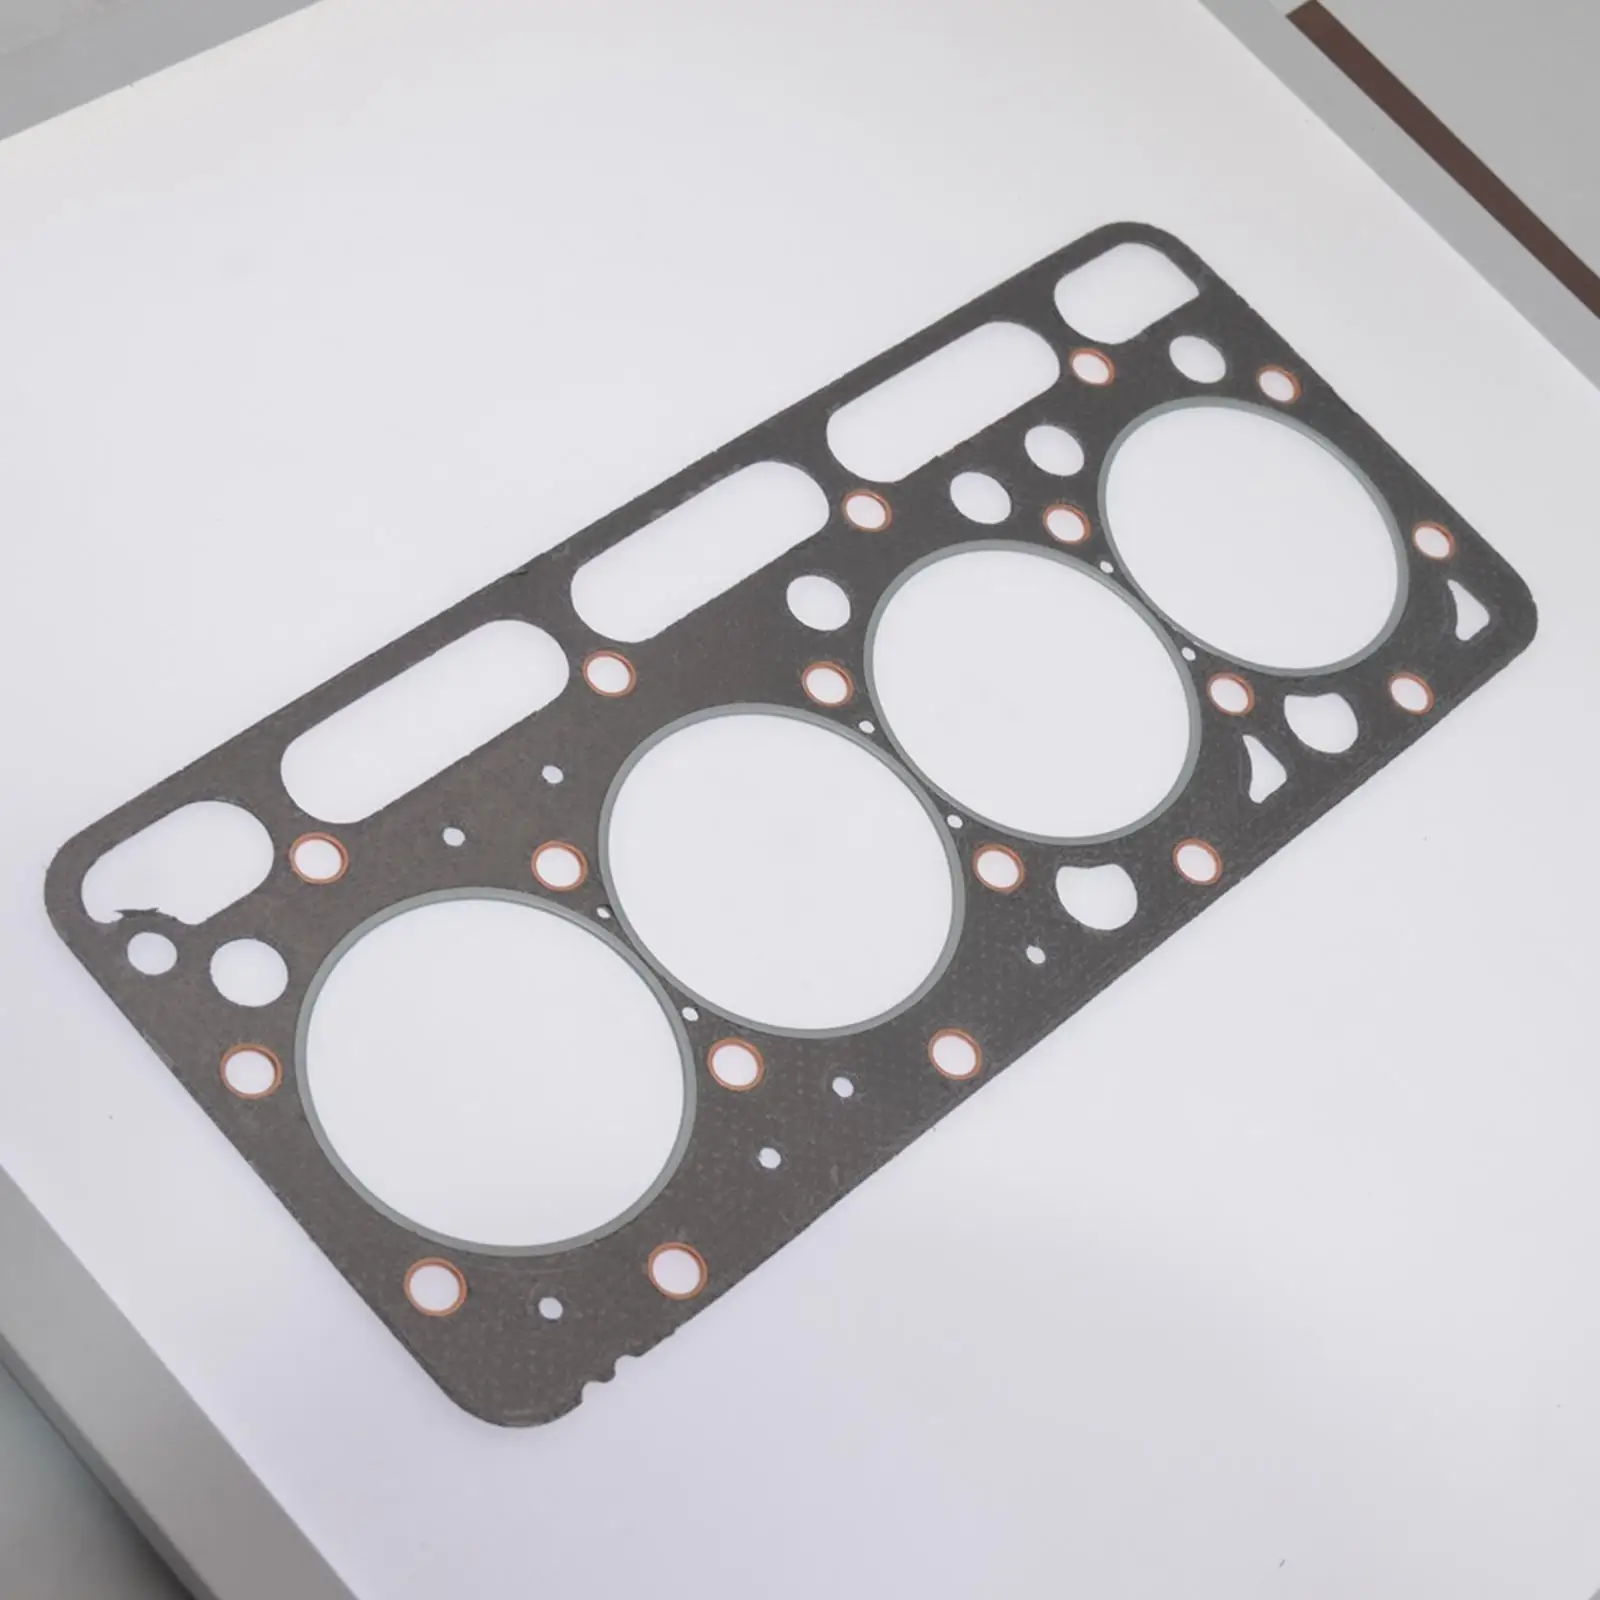 

19077-03310 Head Gasket Accessories Direct Replaces High Quality Parts Professional Durable for Kubota Bobcat V2203 V2403